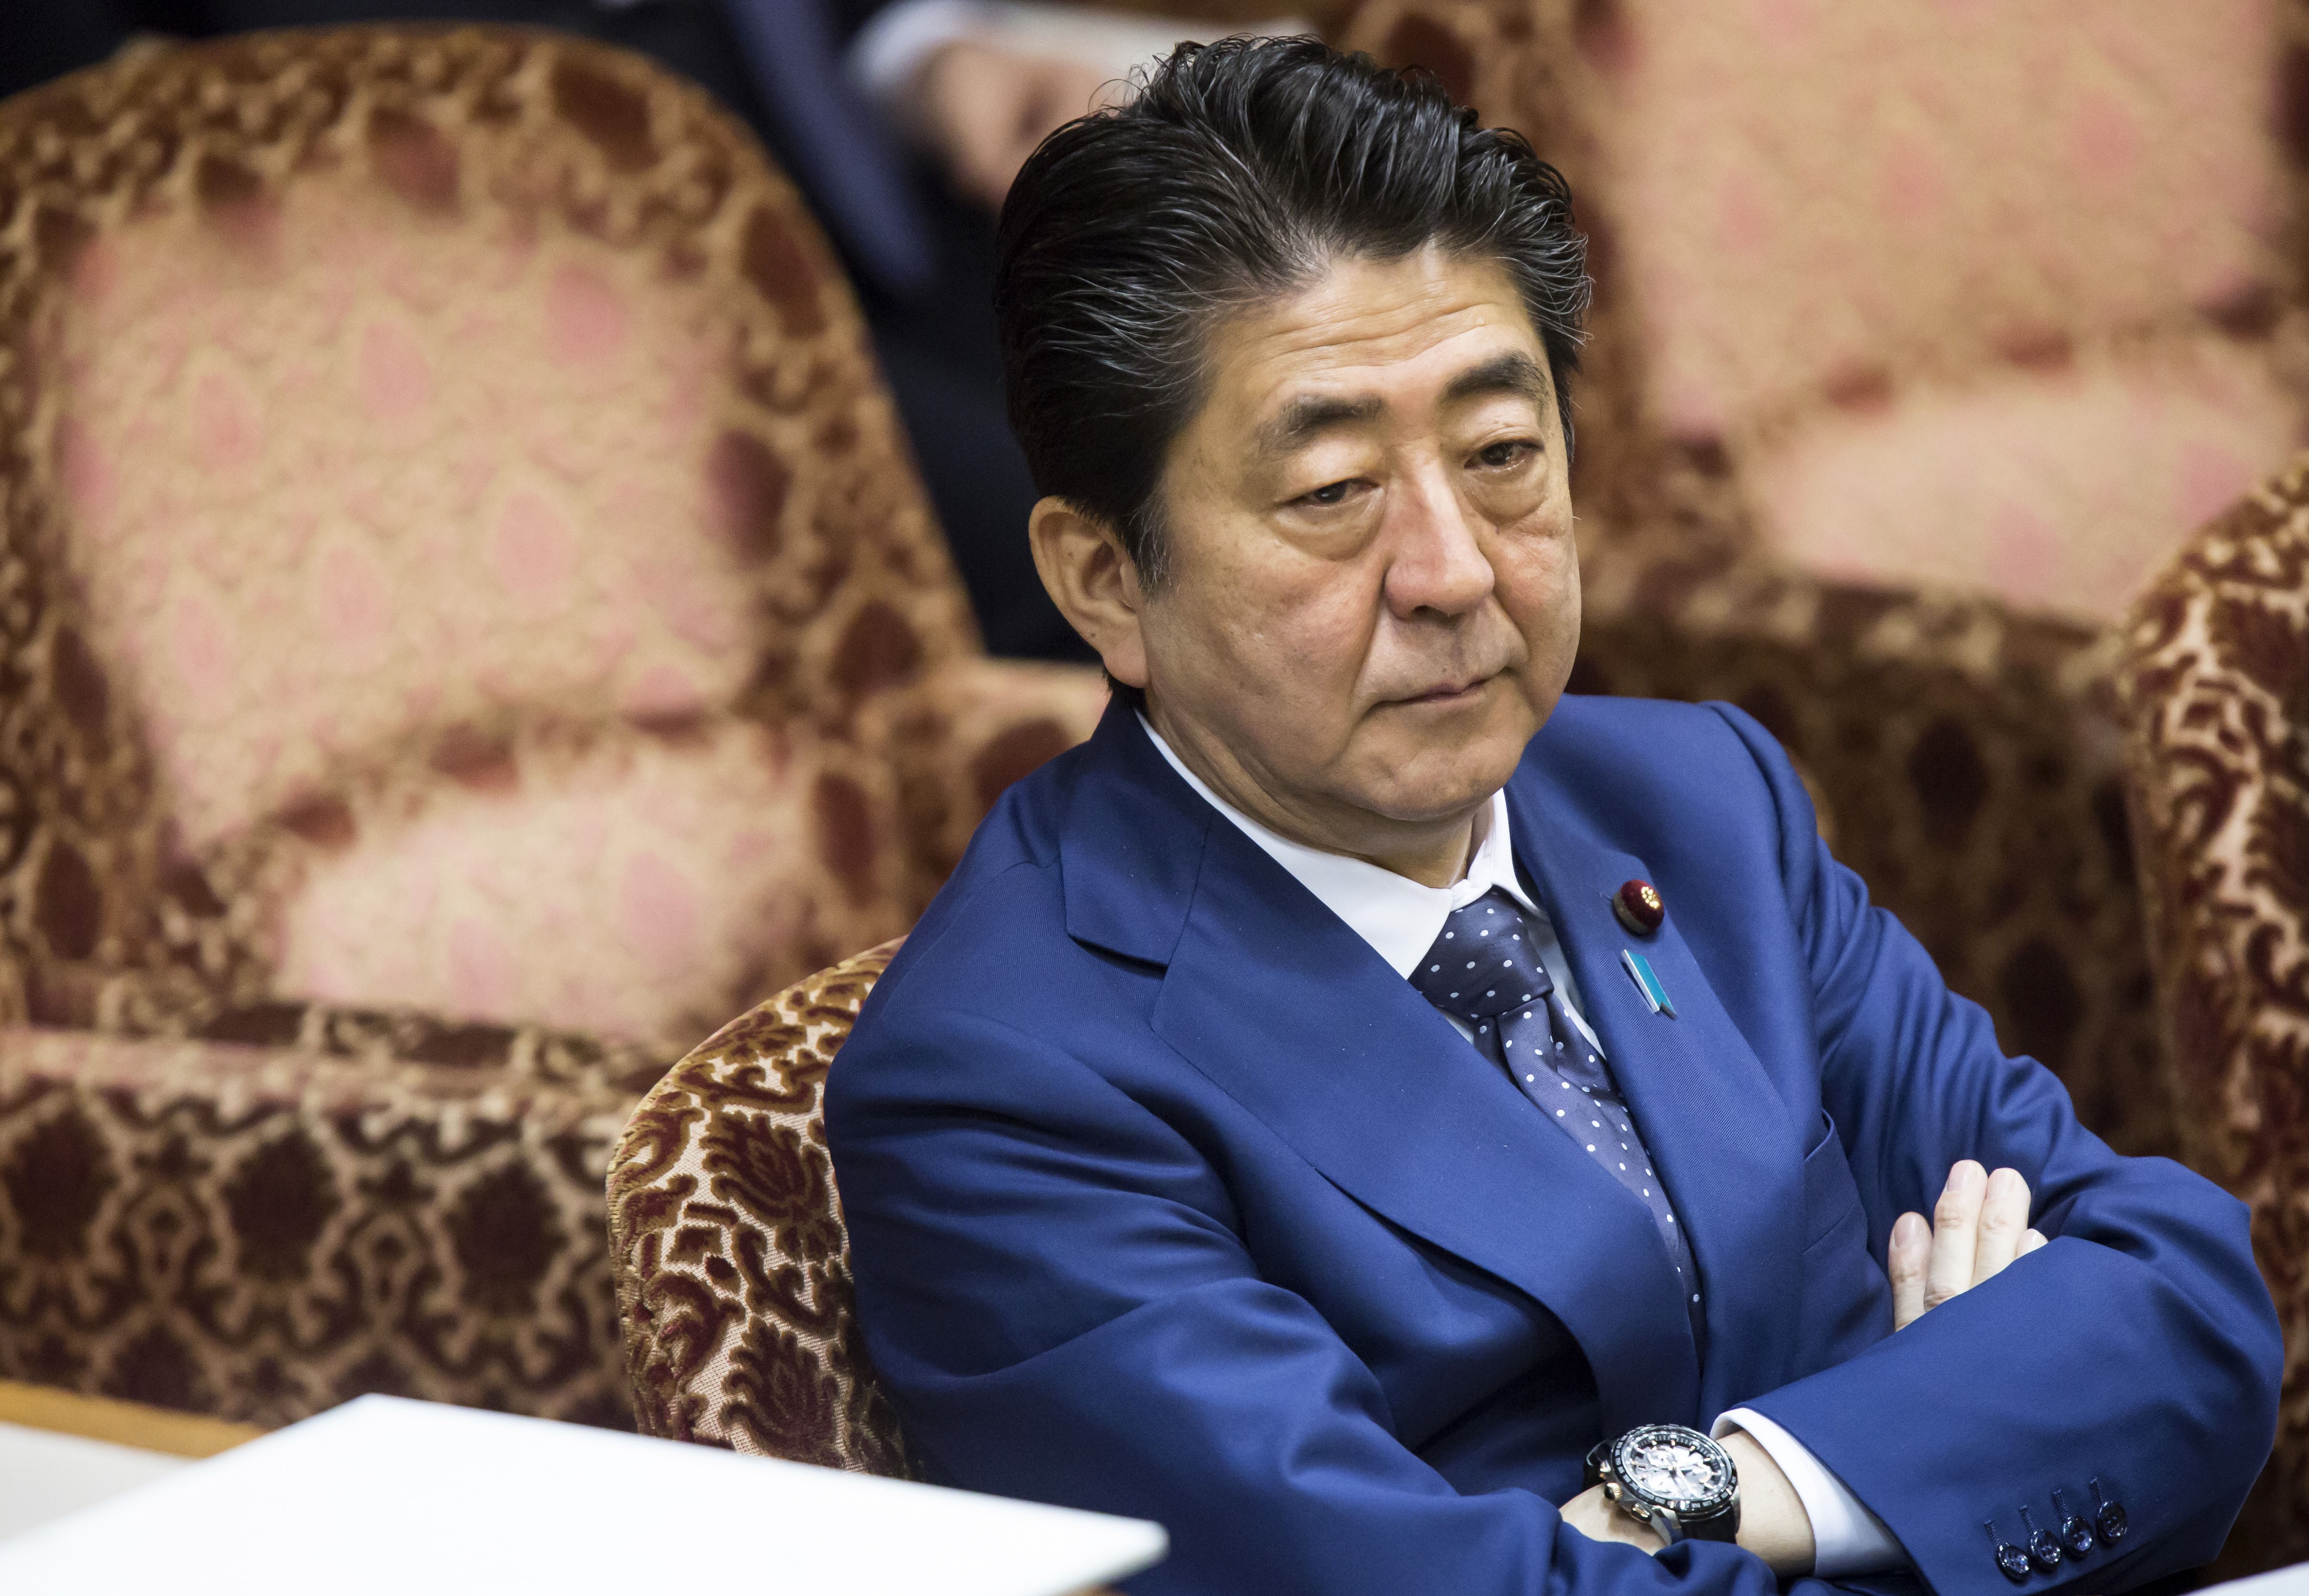 Prime Minister Shinzo Abe attends a budget committee session at the Upper House of Parliament in Tokyo on March 14. Photo: Bloomberg